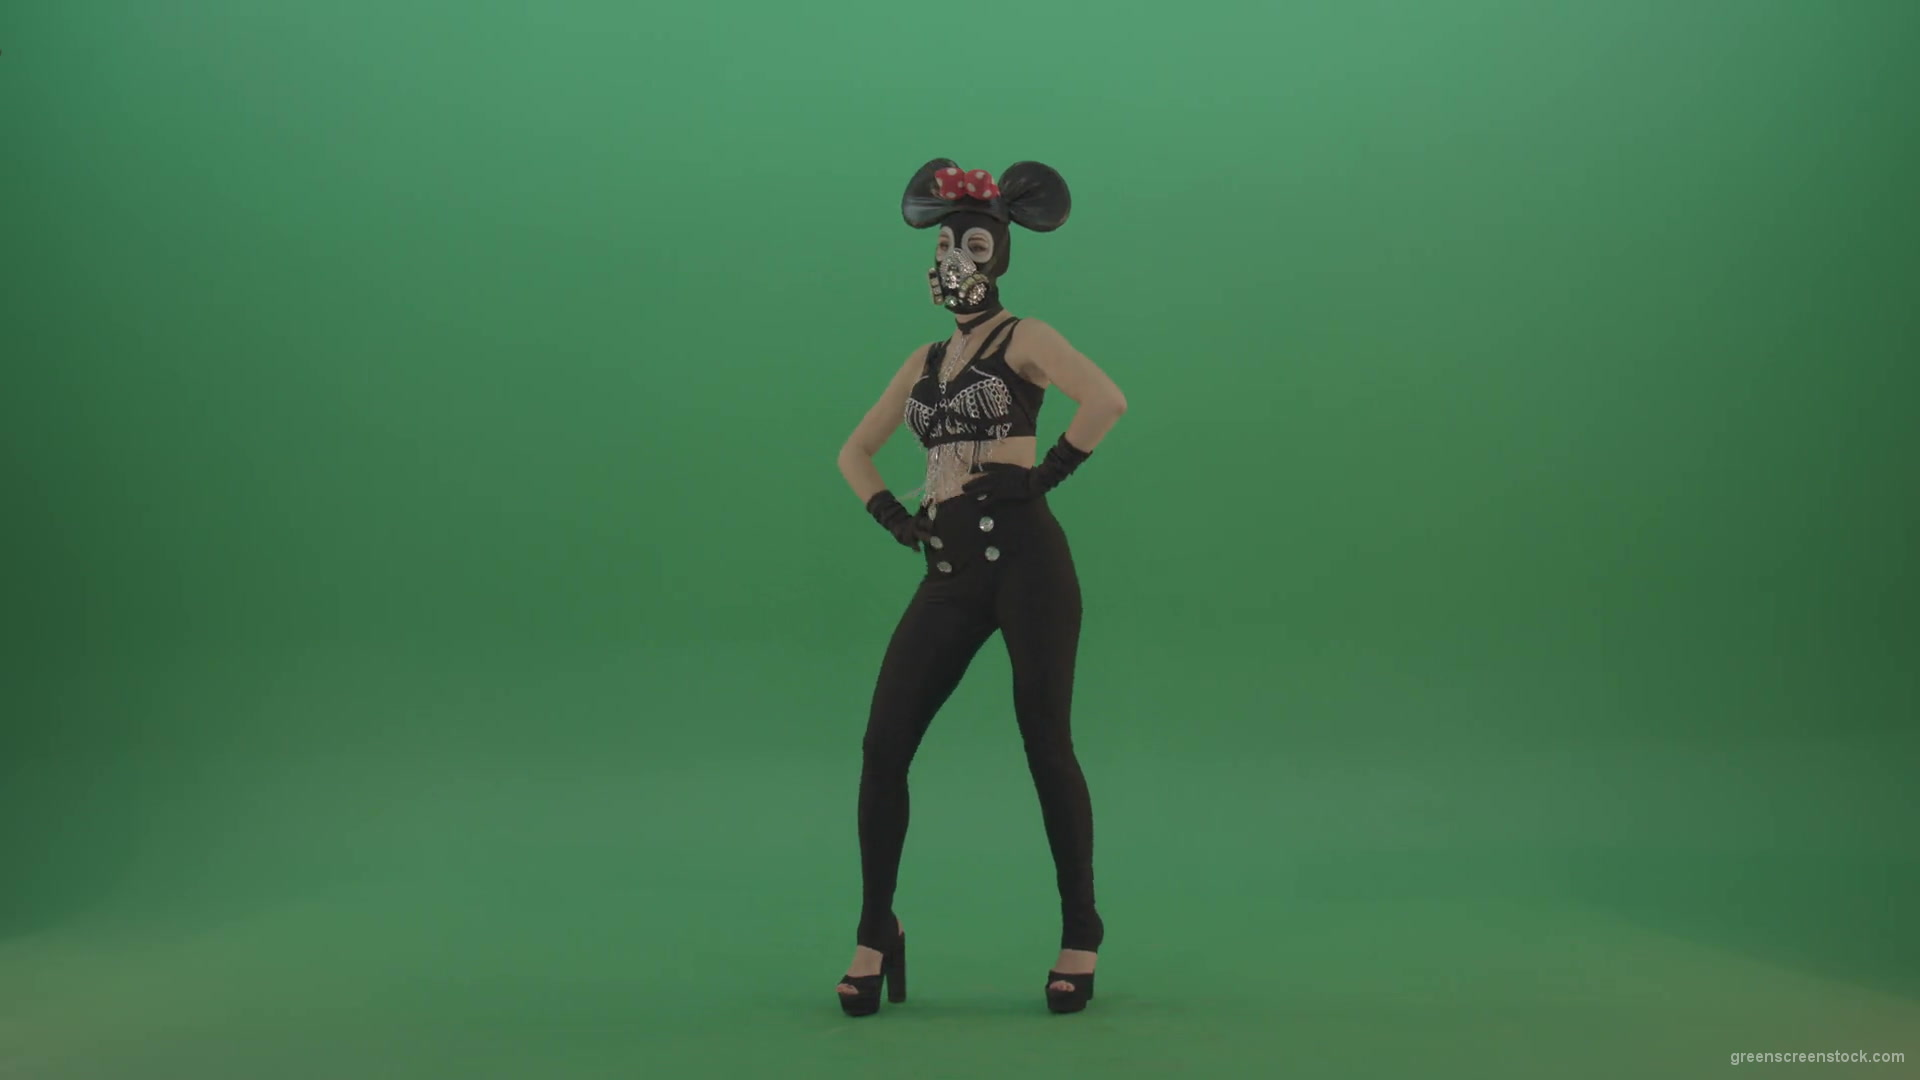 Full-size-strip-girl-in-mouse-costume-and-mask-shaking-ass-and-dancing-on-green-screen-1920_004 Green Screen Stock